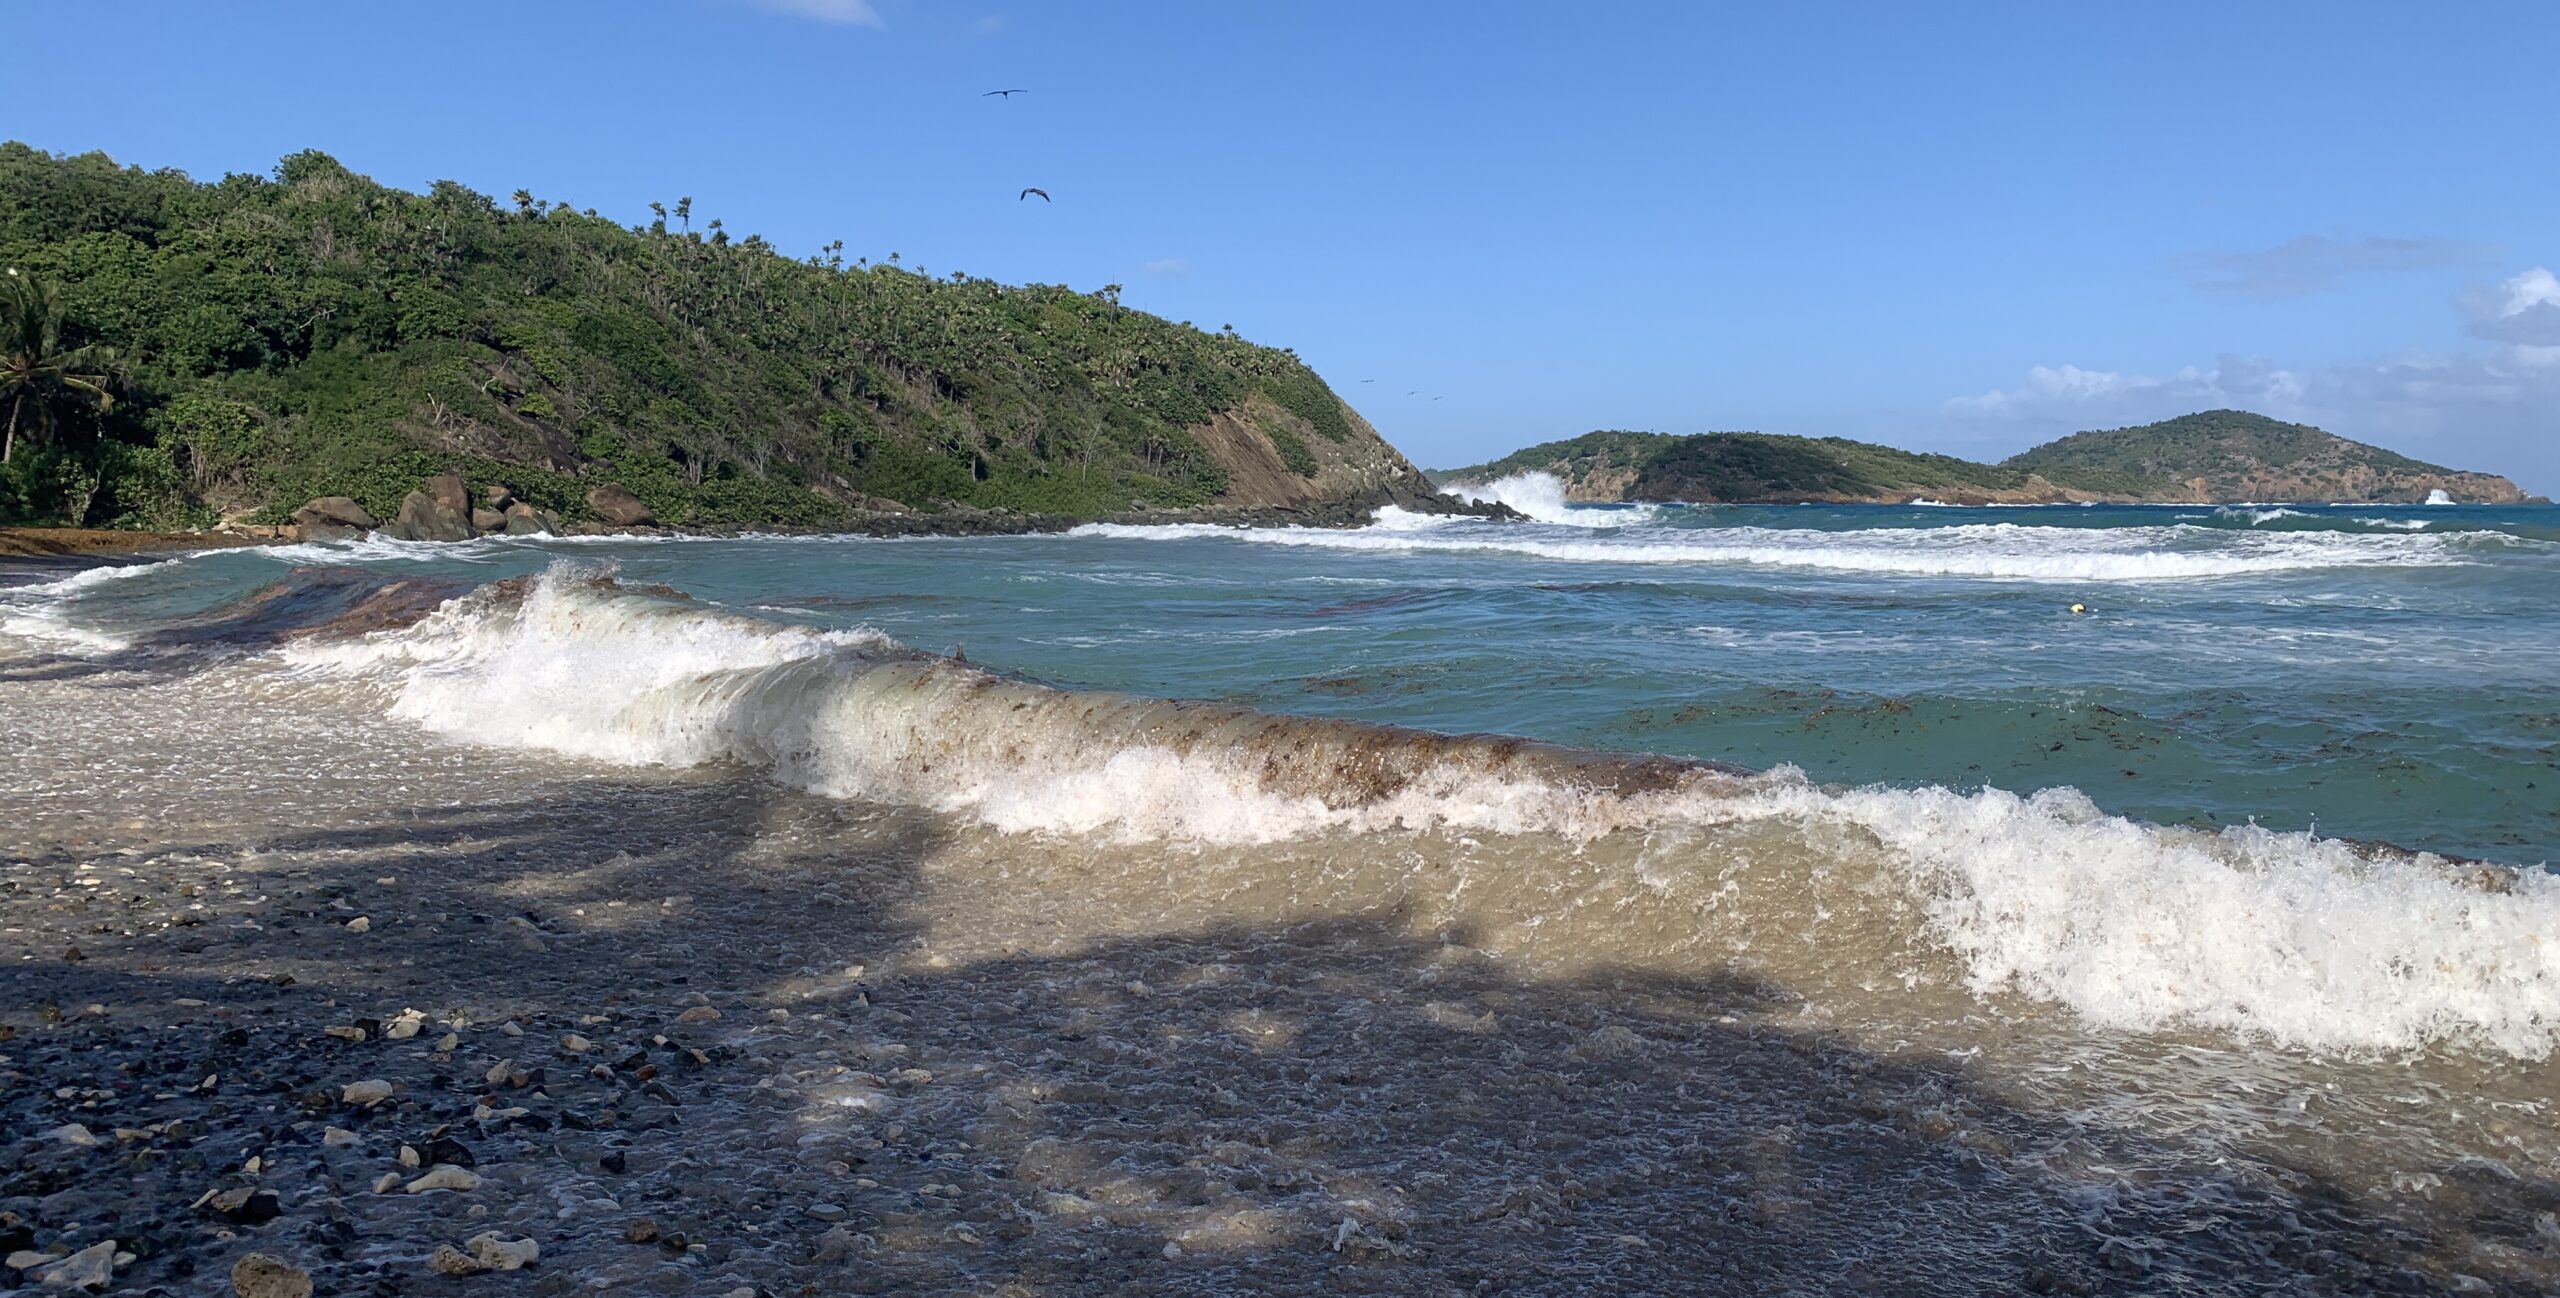 Waves break at Dorothea beach on St. Thomas on Friday. Powerful northerly and northeasterly swells have impacted the islands over the past week. (Source photo by Jesse Daley)